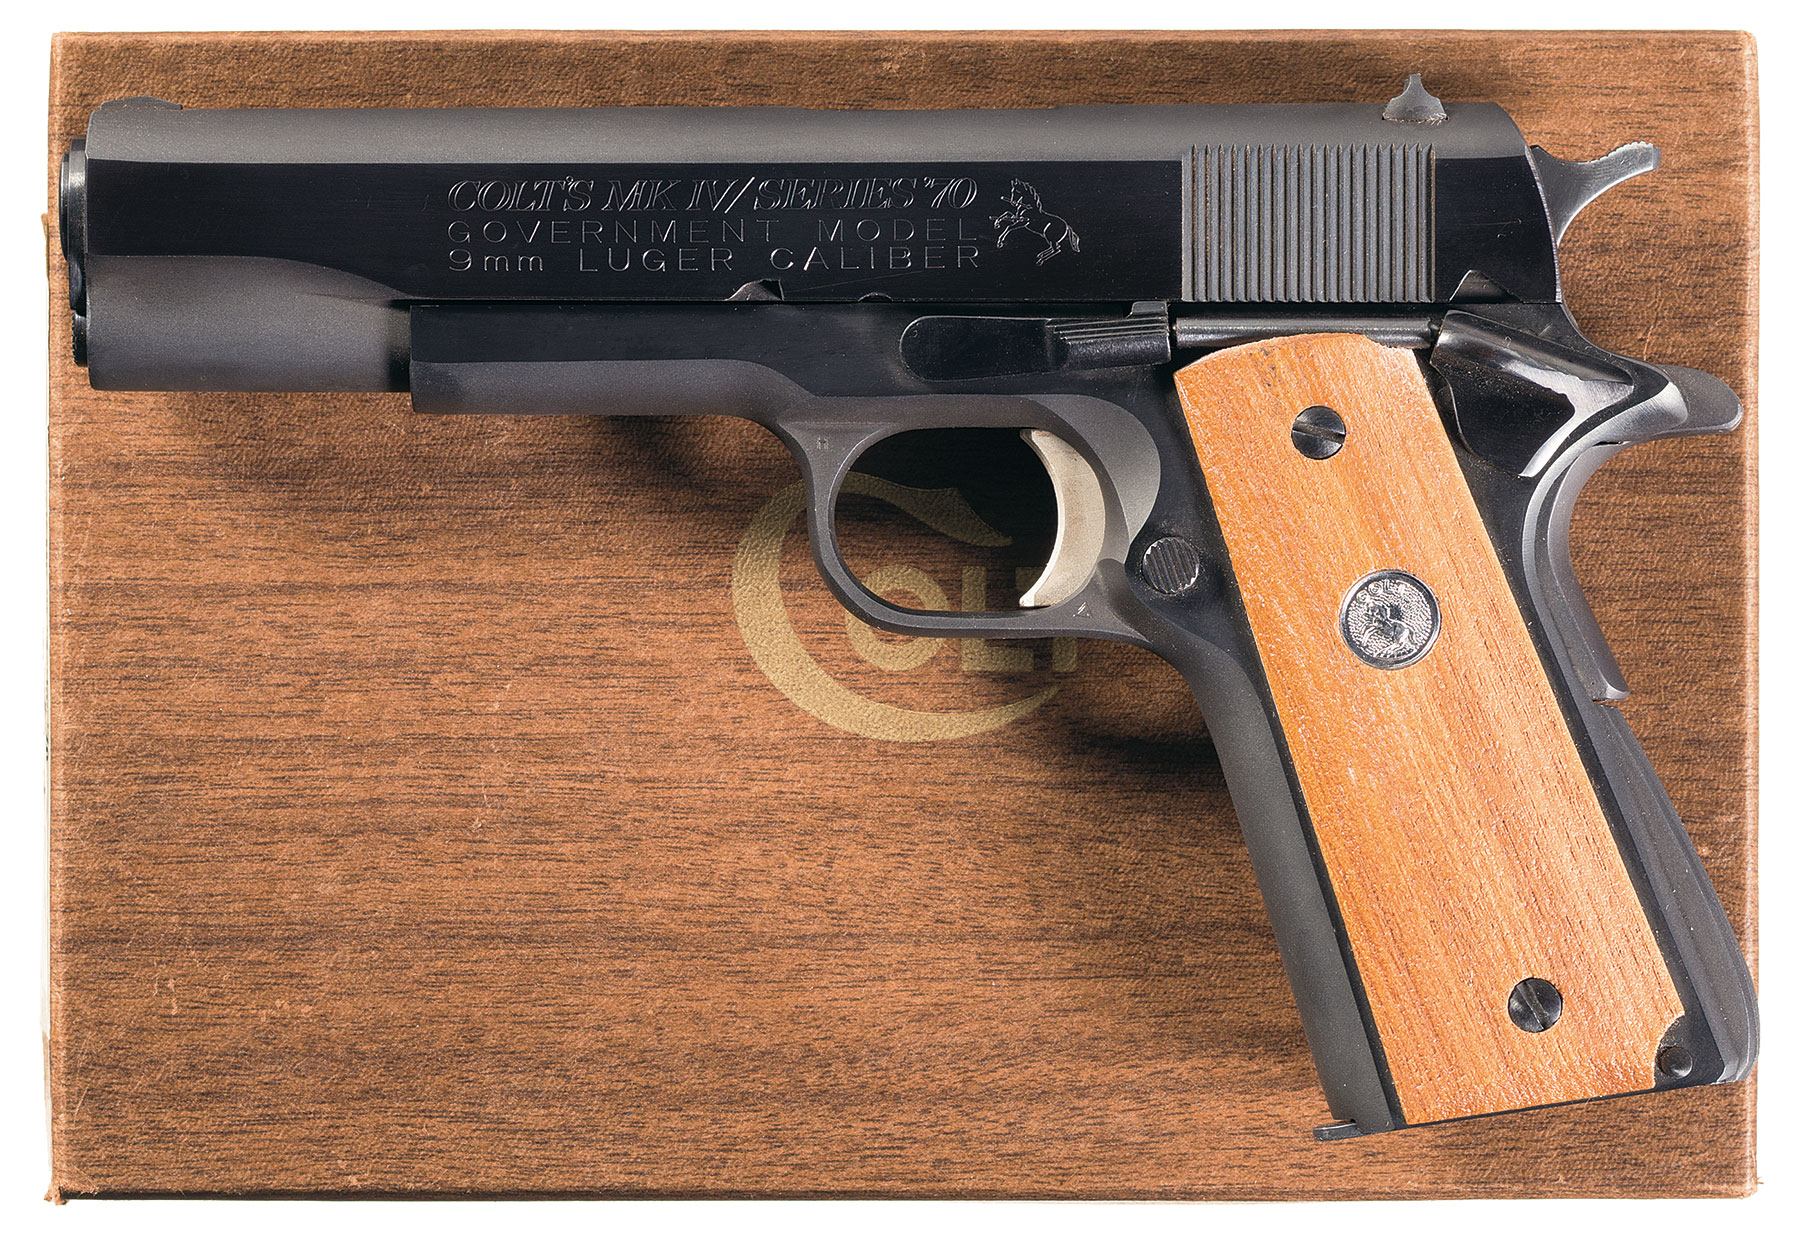 Colt Mark IV Government Model Pistol in 9mm Luger with Box.